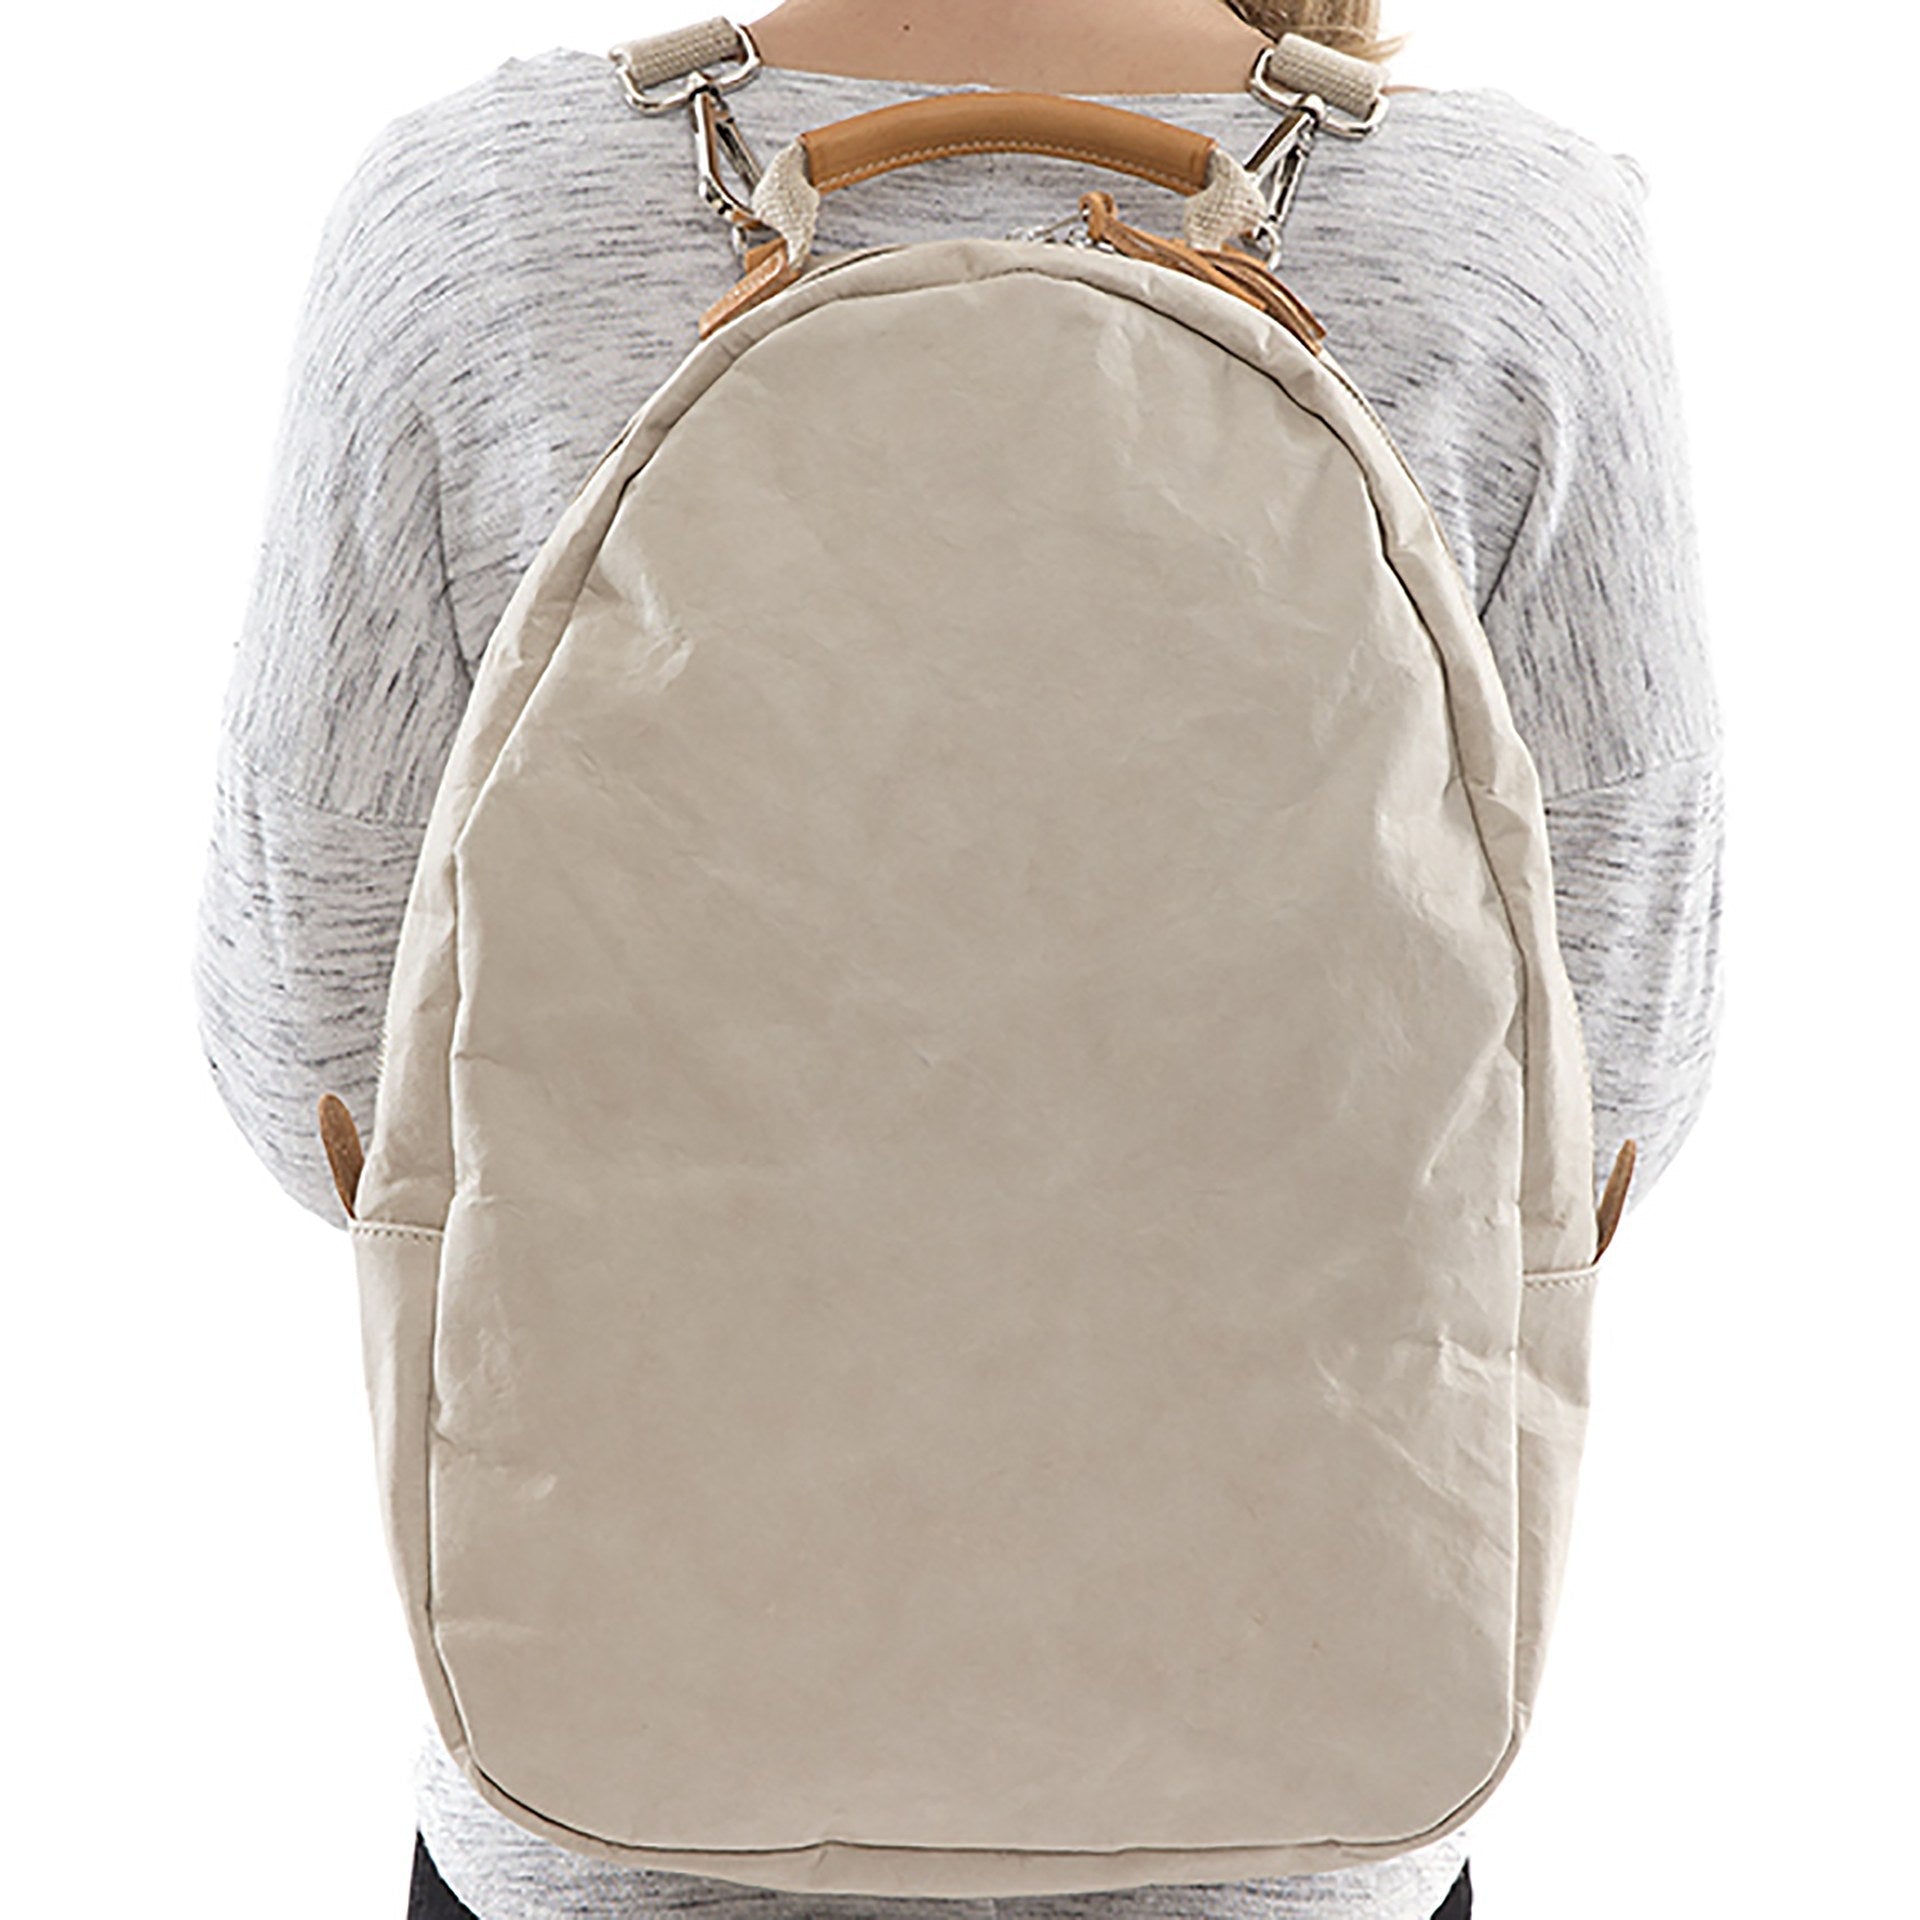 A blonde woman is shown wearing a washable paper backpack. It has two side zip toggles, is oval in shape and it is cream in colour.